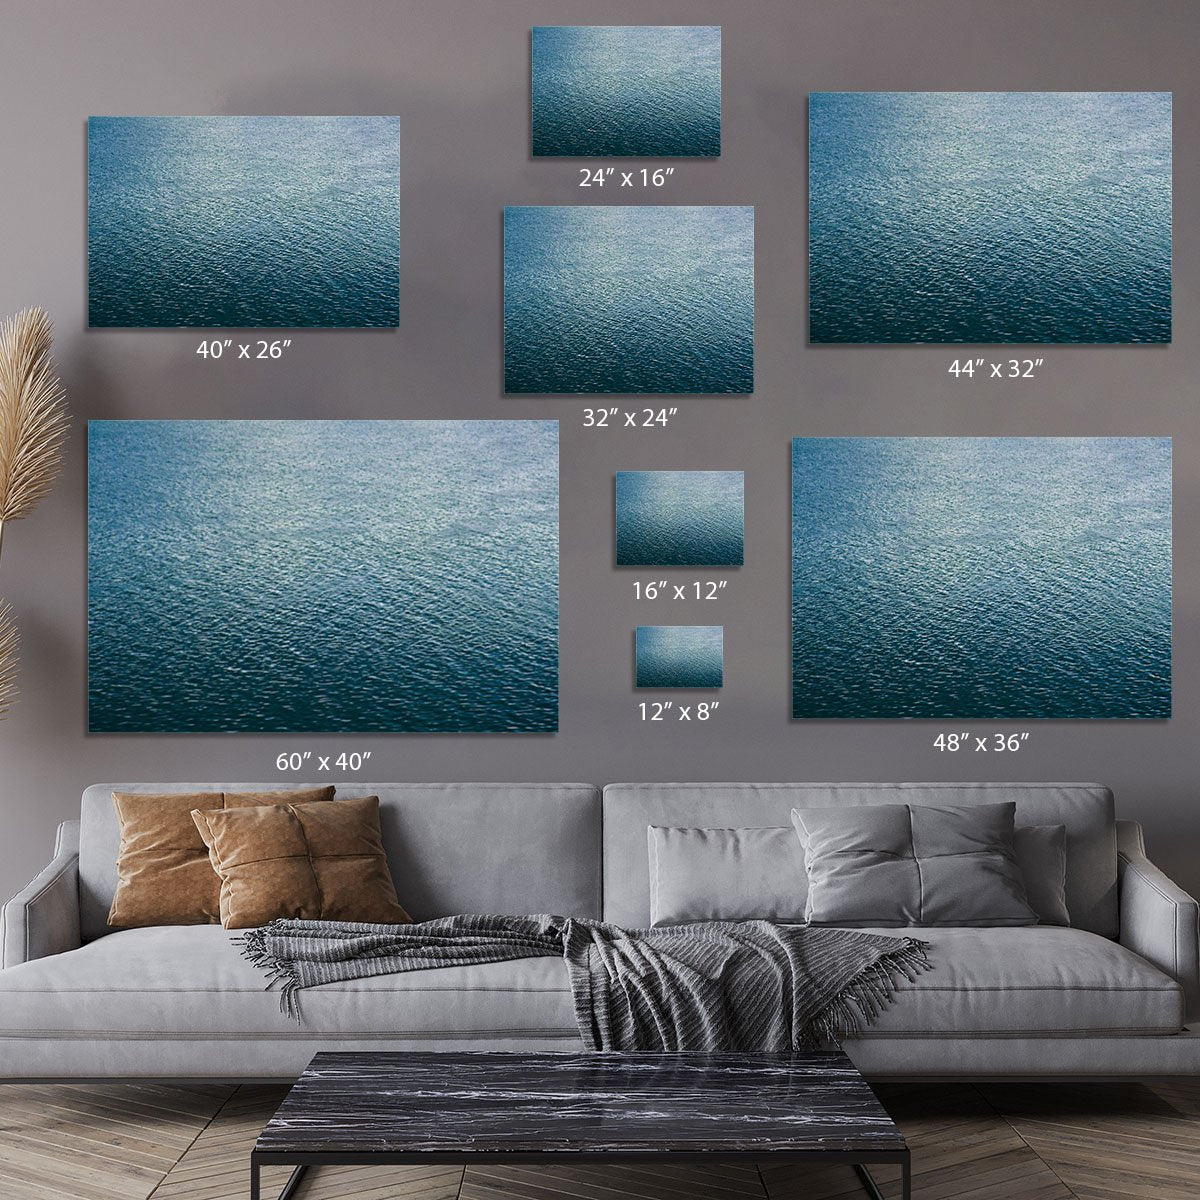 Ripple on blue water Canvas Print or Poster